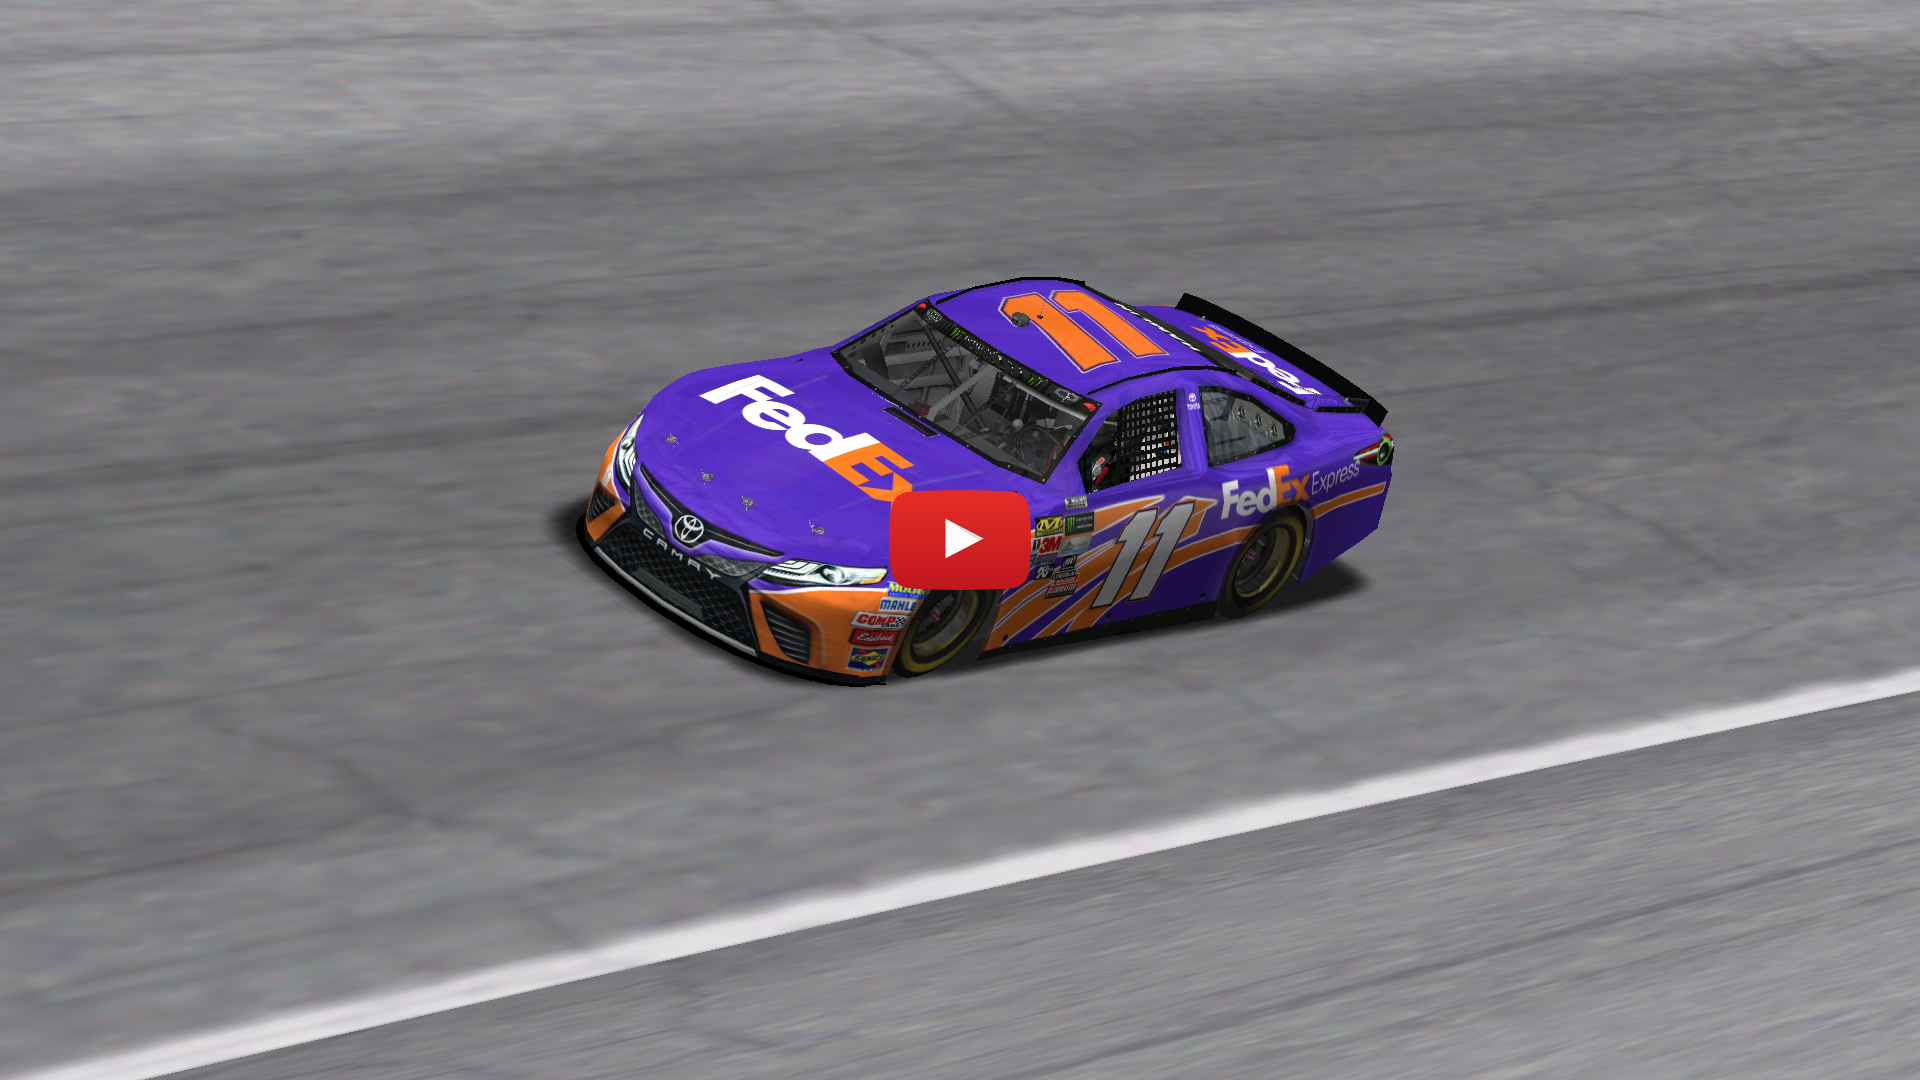 Race replay from the ARL Patch Cup Series Georgia Peaches 150 held on Saturday, March 4th 2017.